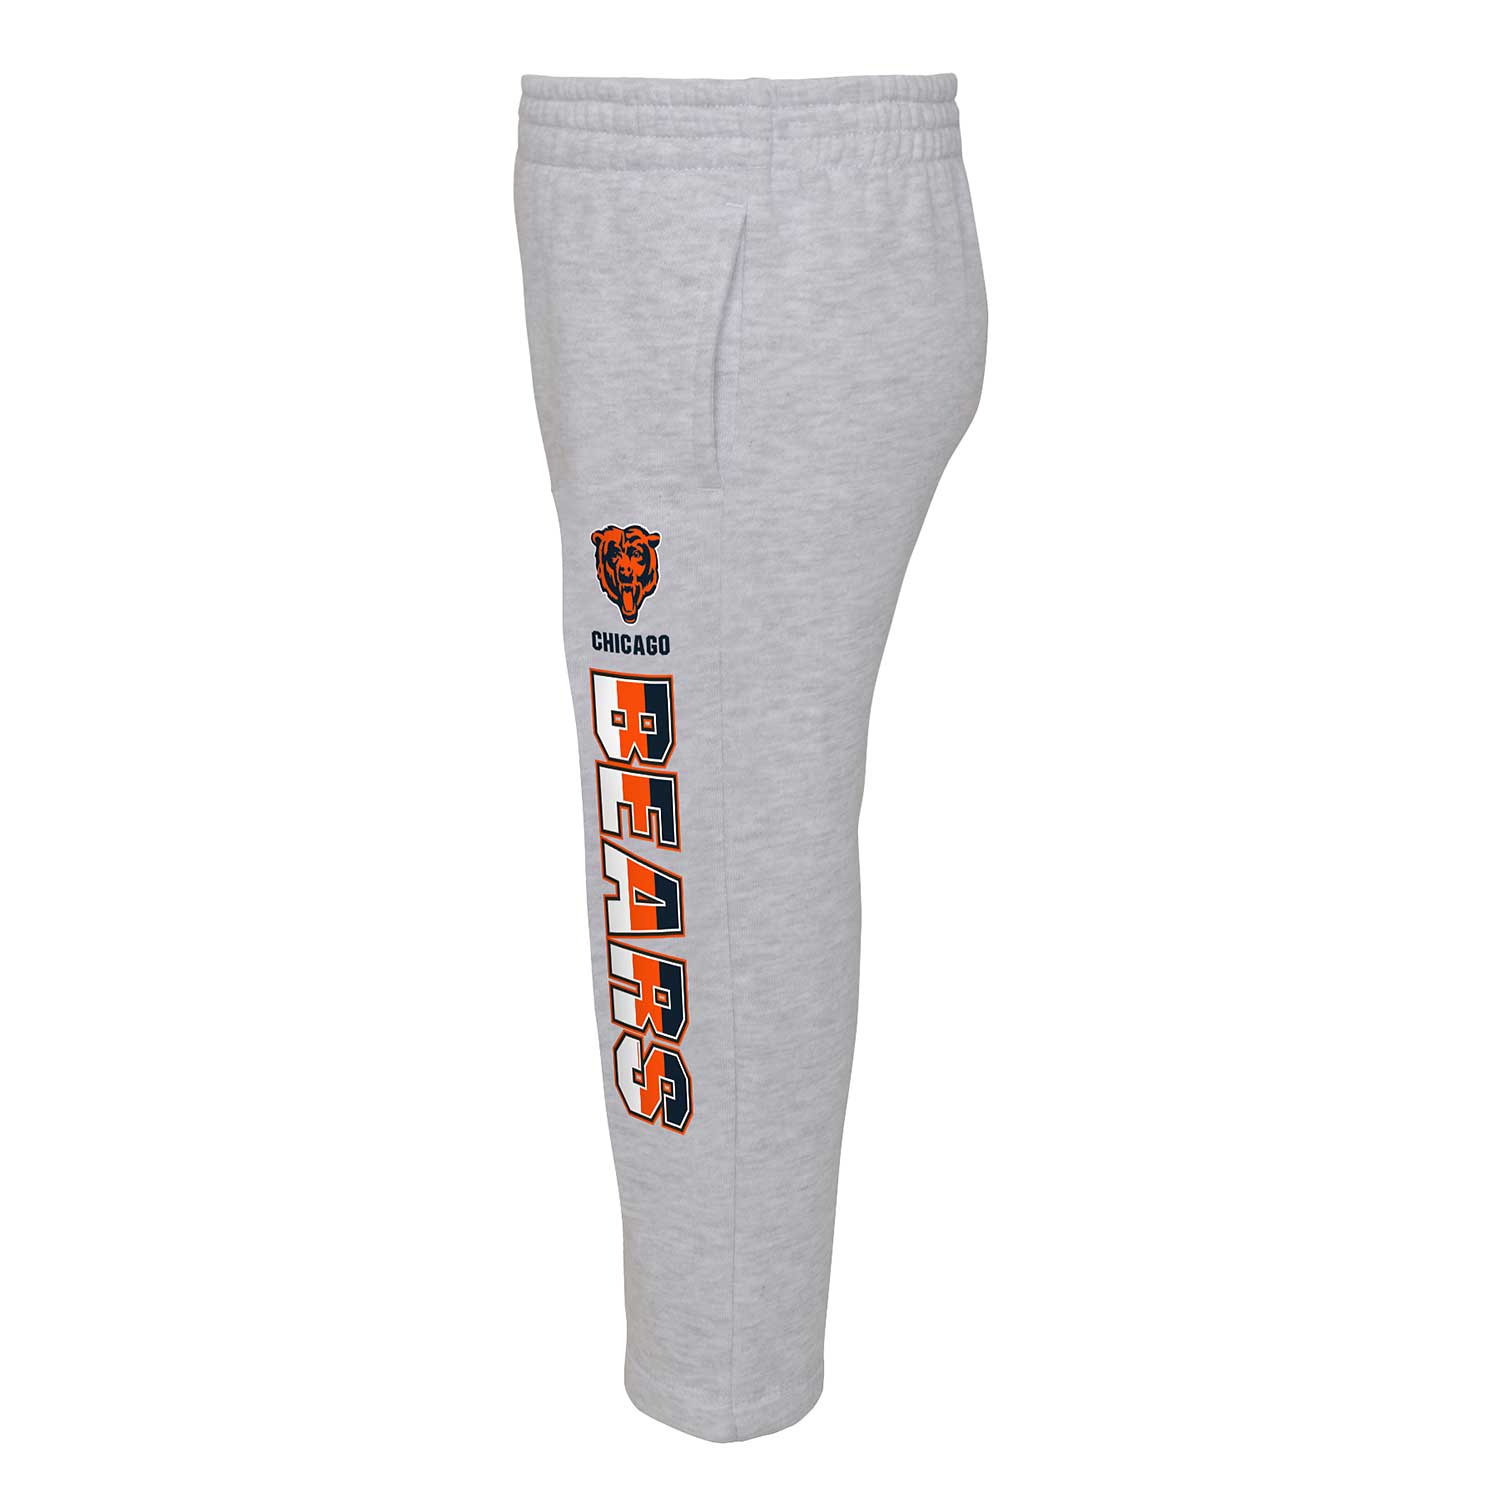 Chicago Bears Pants and Shorts